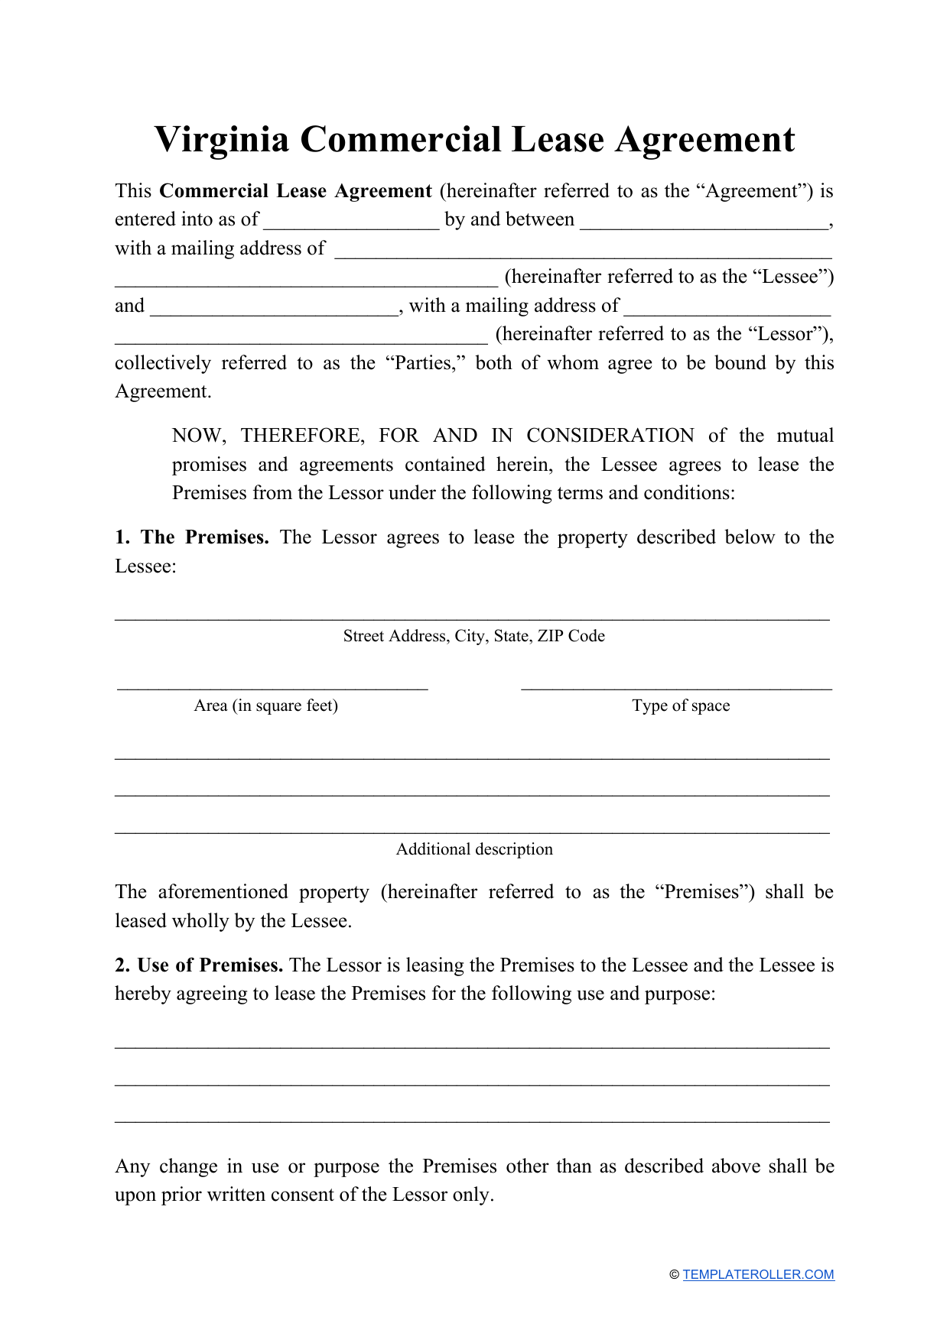 Commercial Lease Agreement Template - Virginia, Page 1